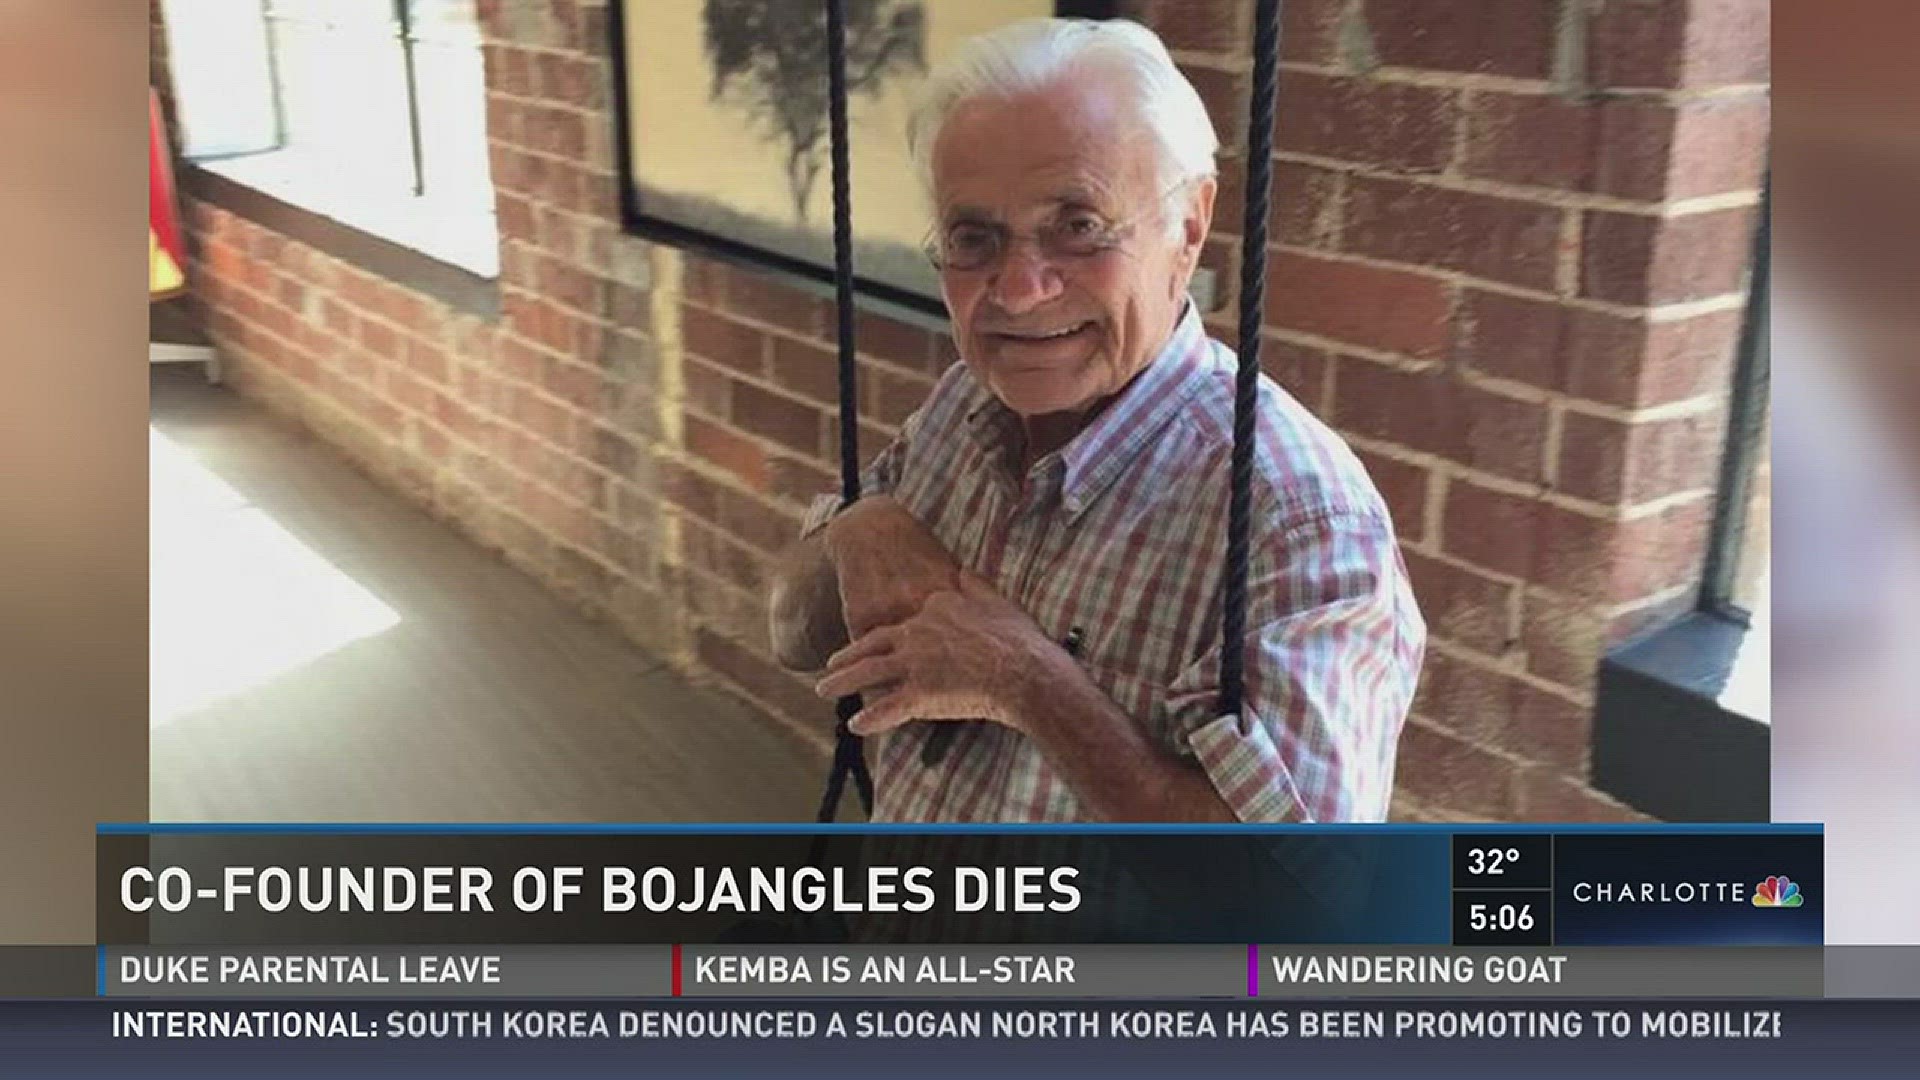 The surviving co-founder of Bojangles' has died, according to his family.